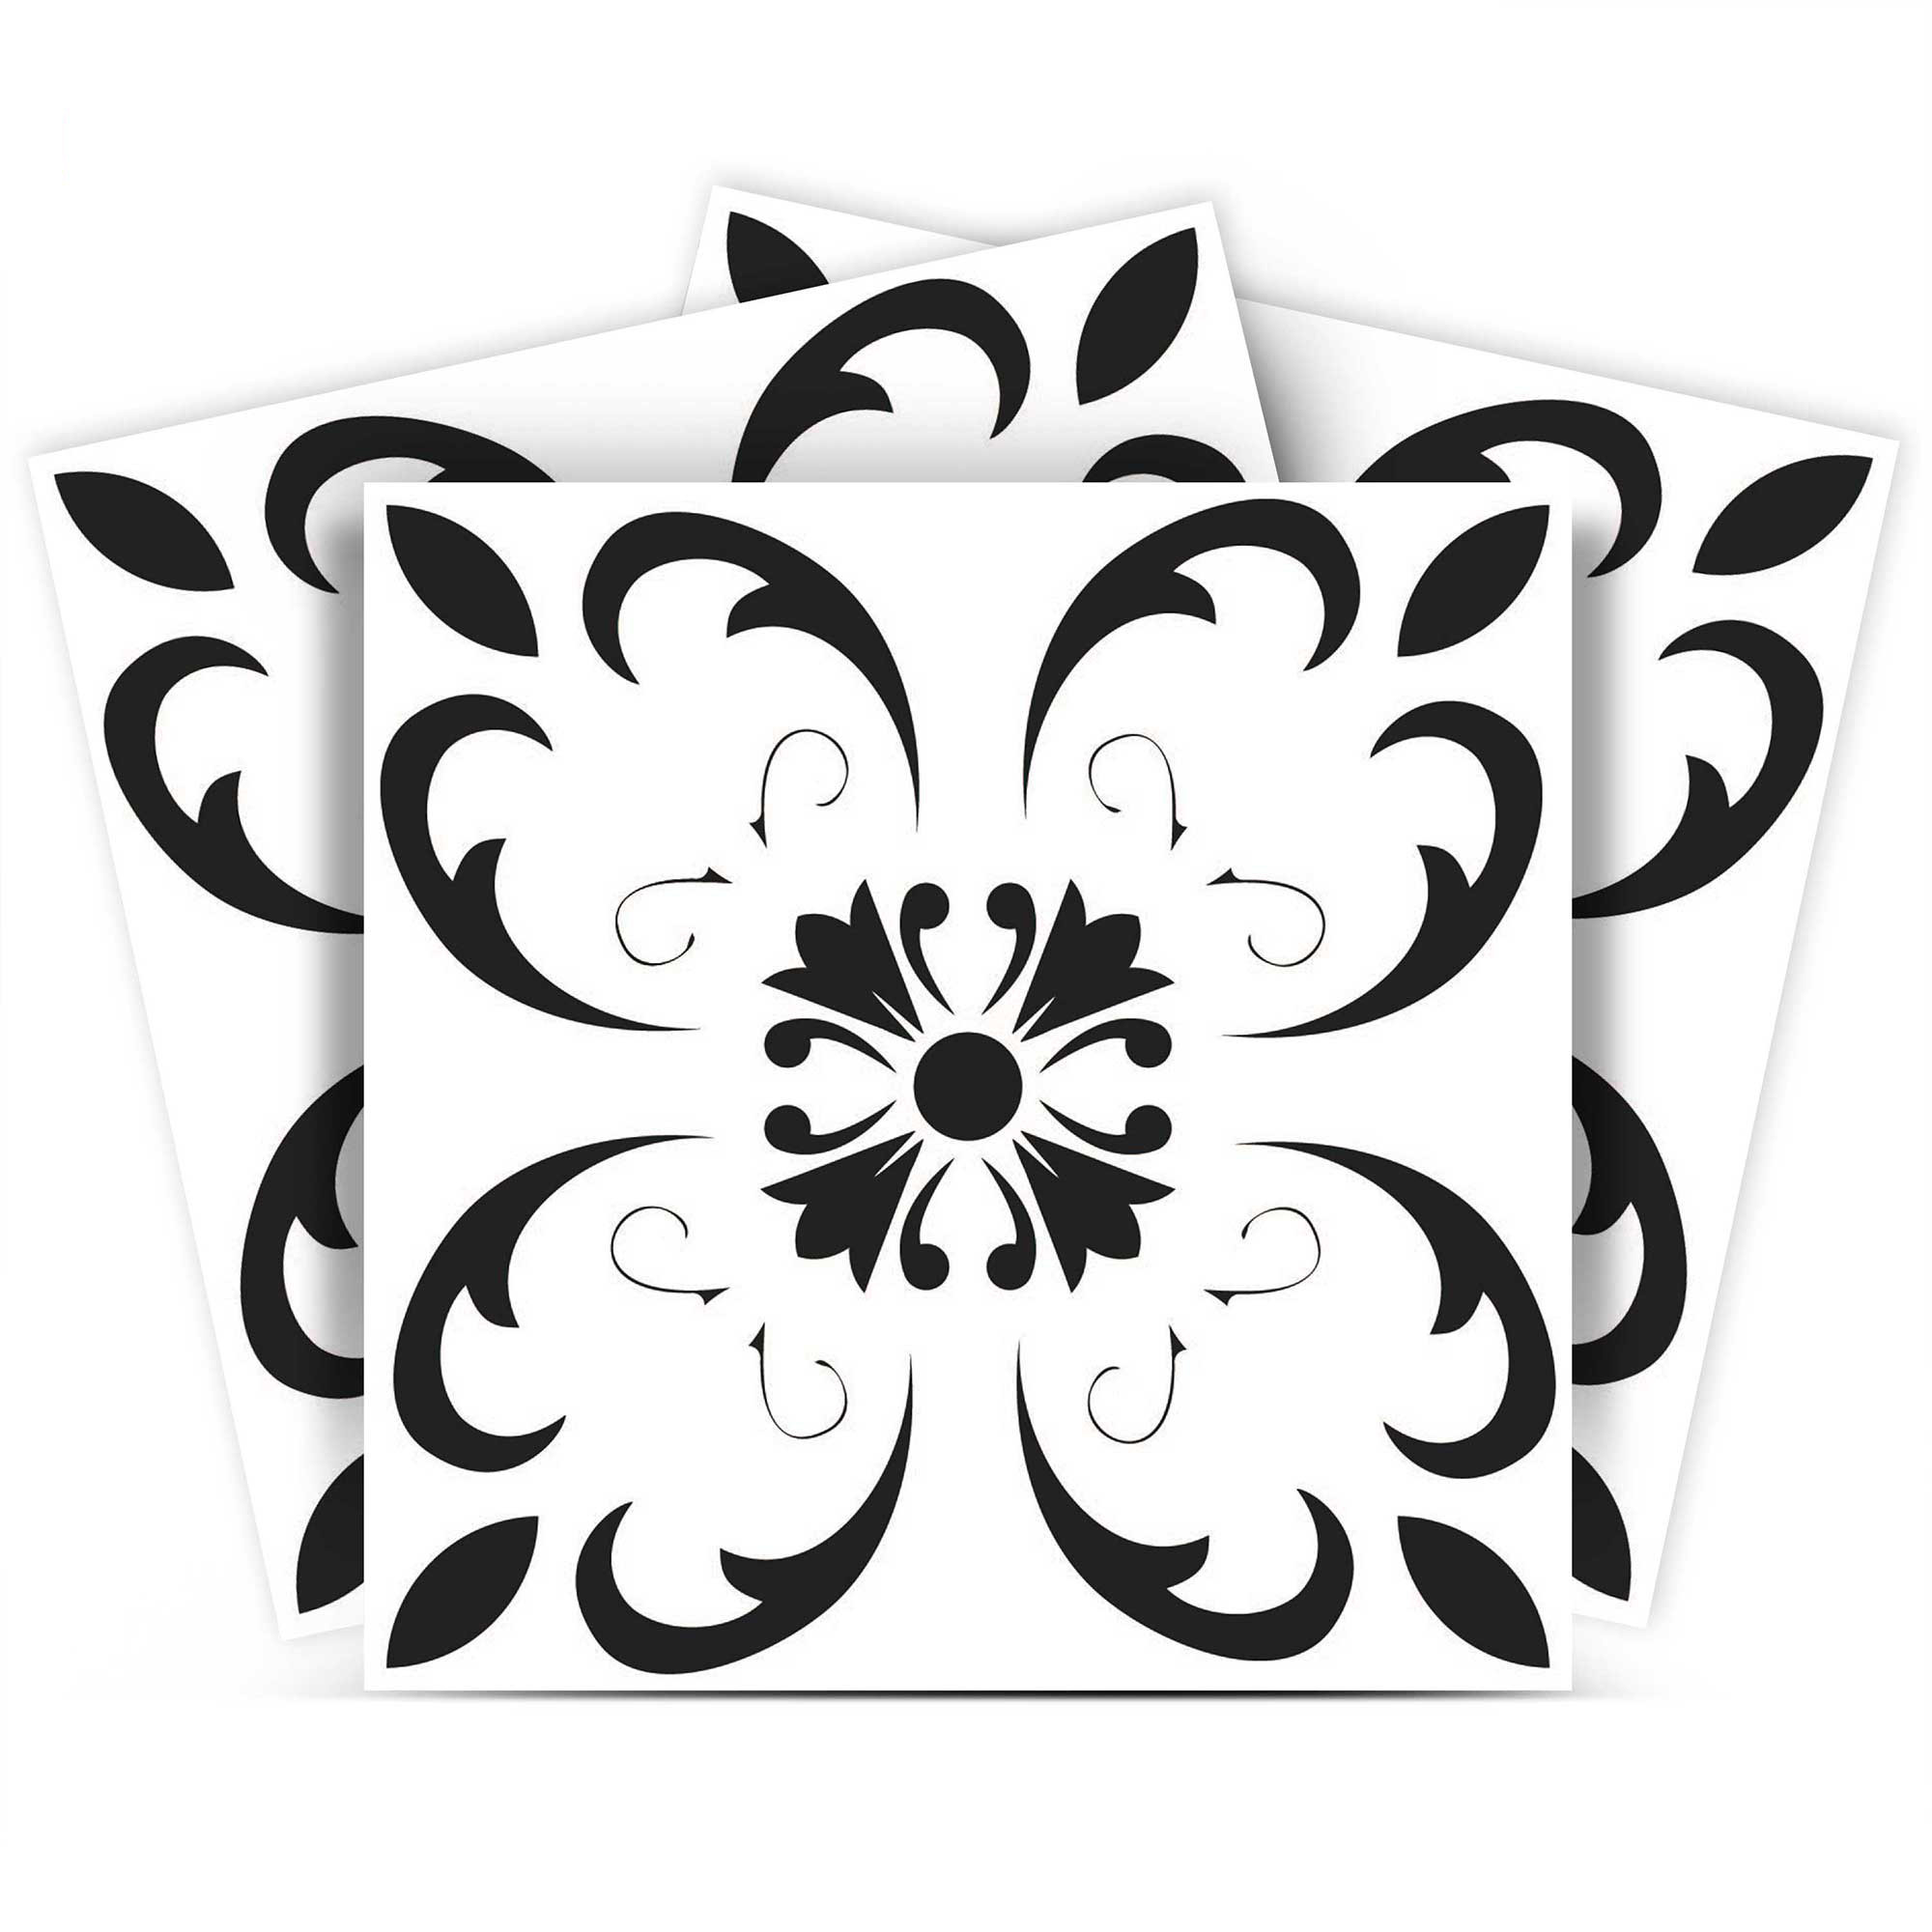 8" X 8" Black and White Delia Peel and Stick Removable Tiles-399894-1